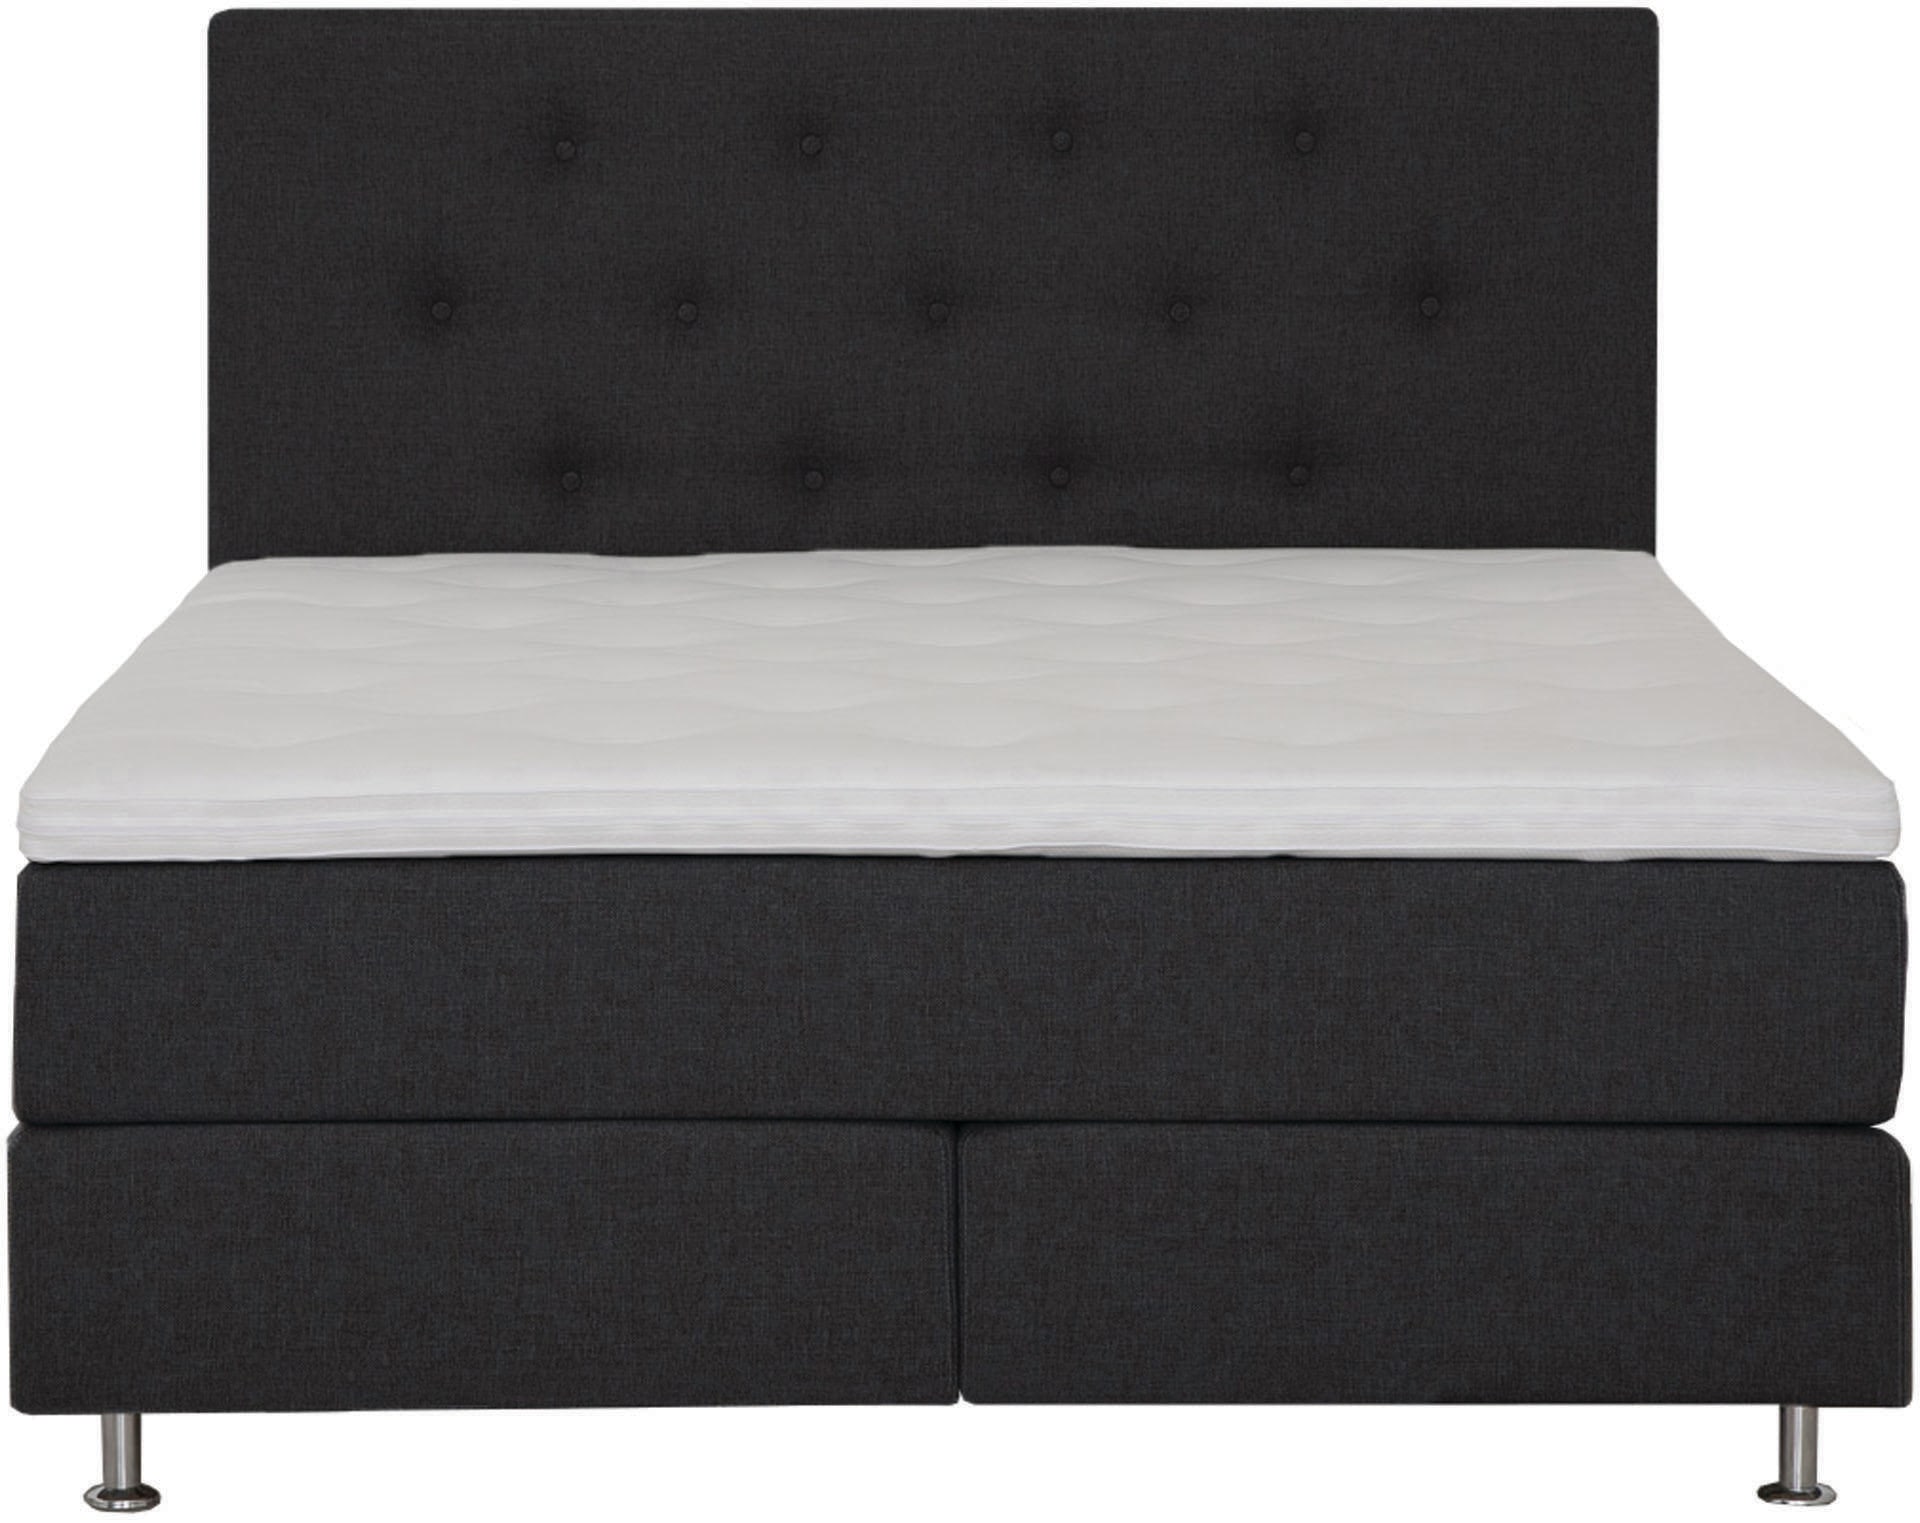 Places of Style Boxspringbett »Nordica«, inkl. Topper, auch in Überlänge 200/220 cm